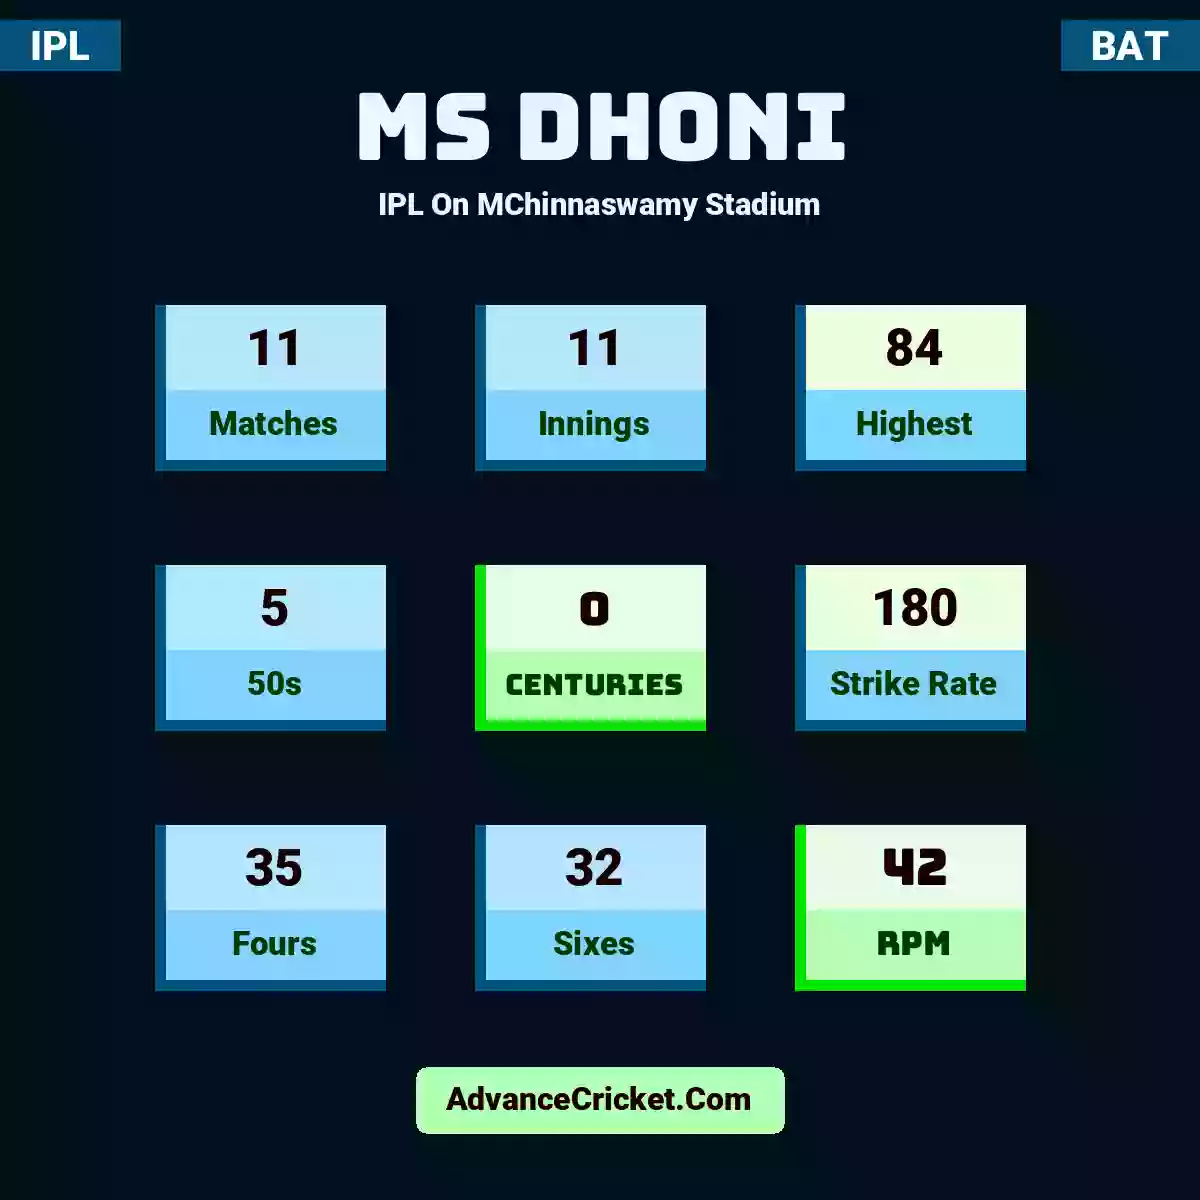 MS Dhoni IPL  On MChinnaswamy Stadium, MS Dhoni played 11 matches, scored 84 runs as highest, 5 half-centuries, and 0 centuries, with a strike rate of 180. M.Dhoni hit 35 fours and 32 sixes, with an RPM of 42.